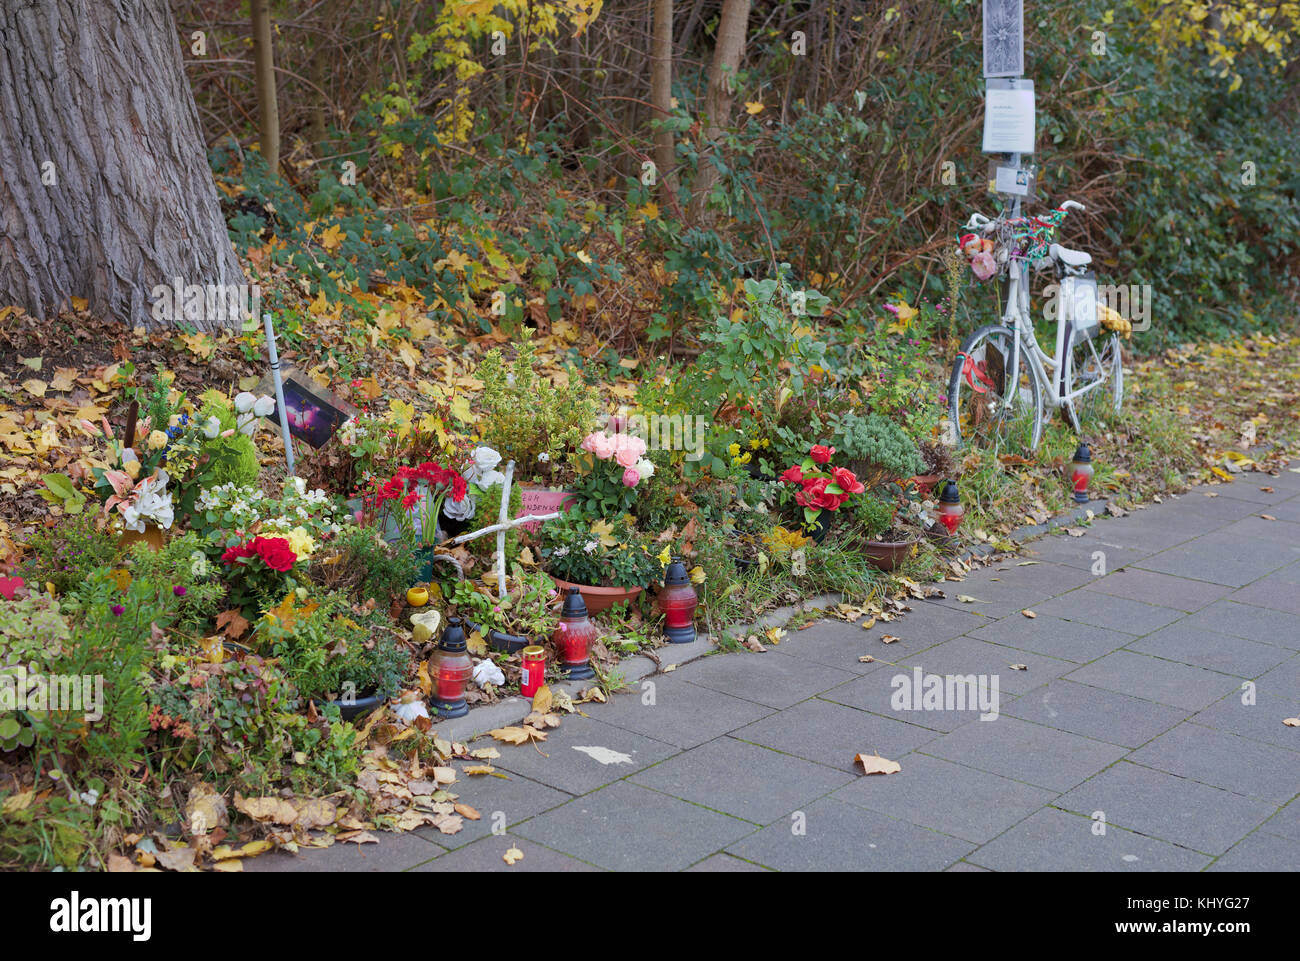 Ghost bike remembering Miriam S. (19), who was killed 2015 in an illegal car race in Auenweg, Cologne, Germany Stock Photo